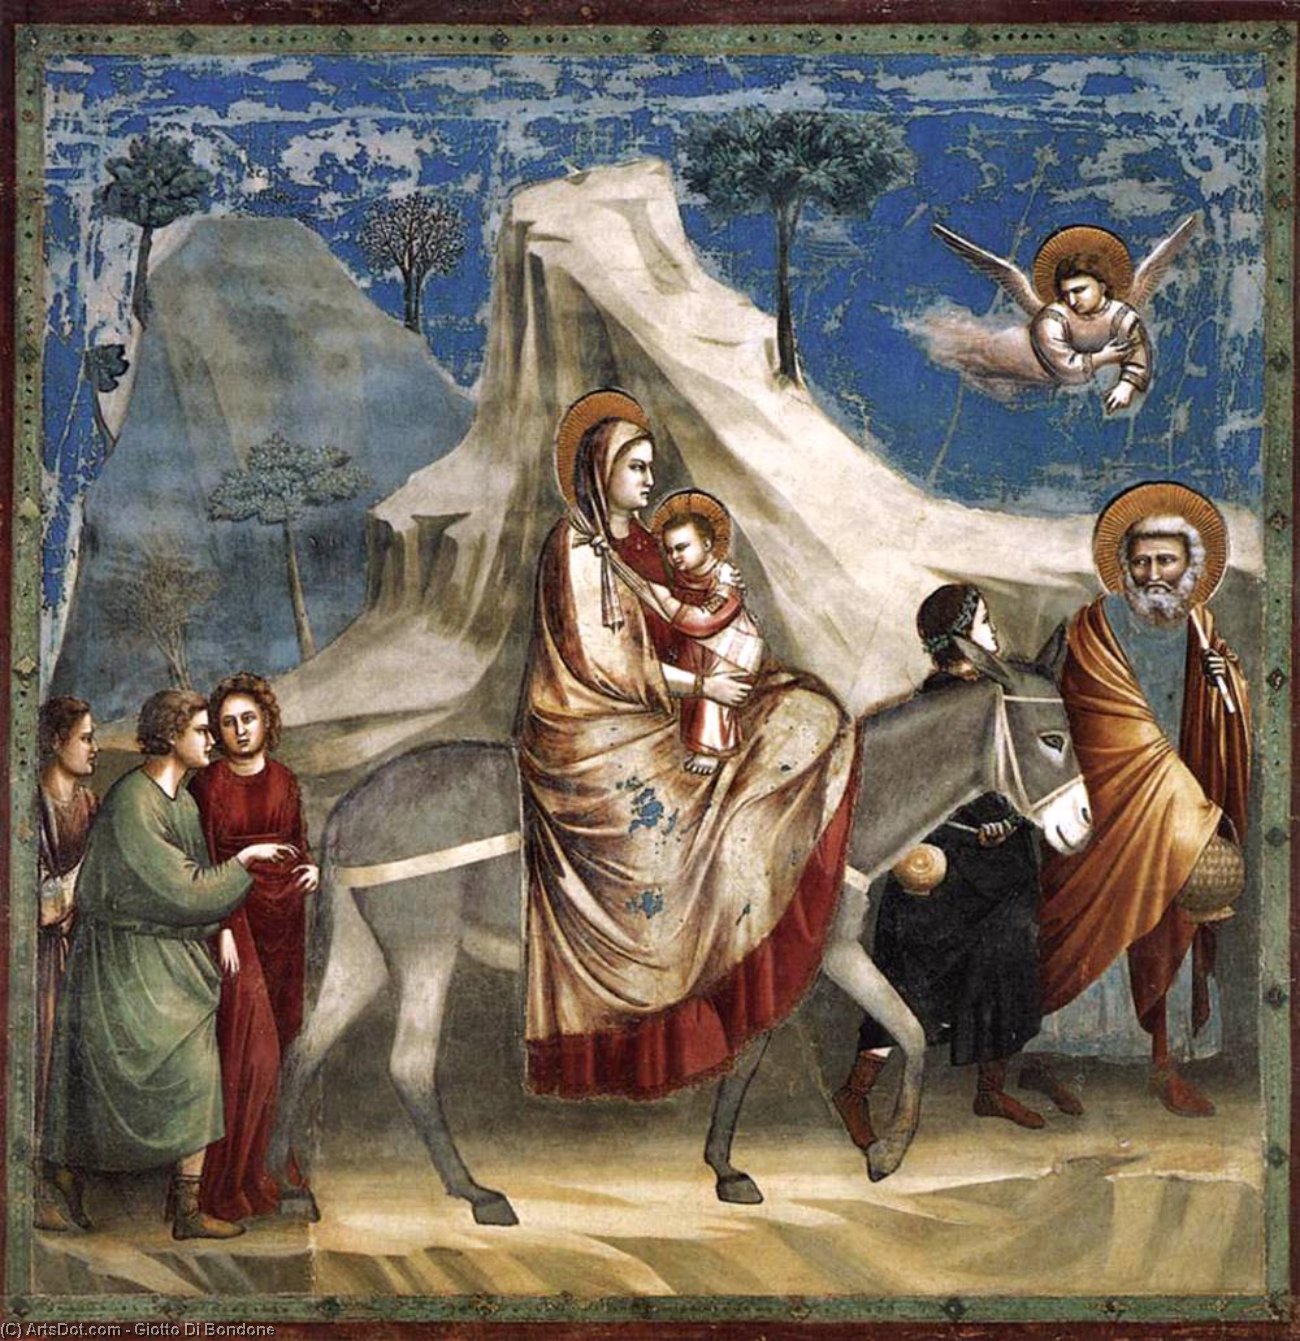 WikiOO.org - 백과 사전 - 회화, 삽화 Giotto Di Bondone - No. 20 Scenes from the Life of Christ: 4. Flight into Egypt